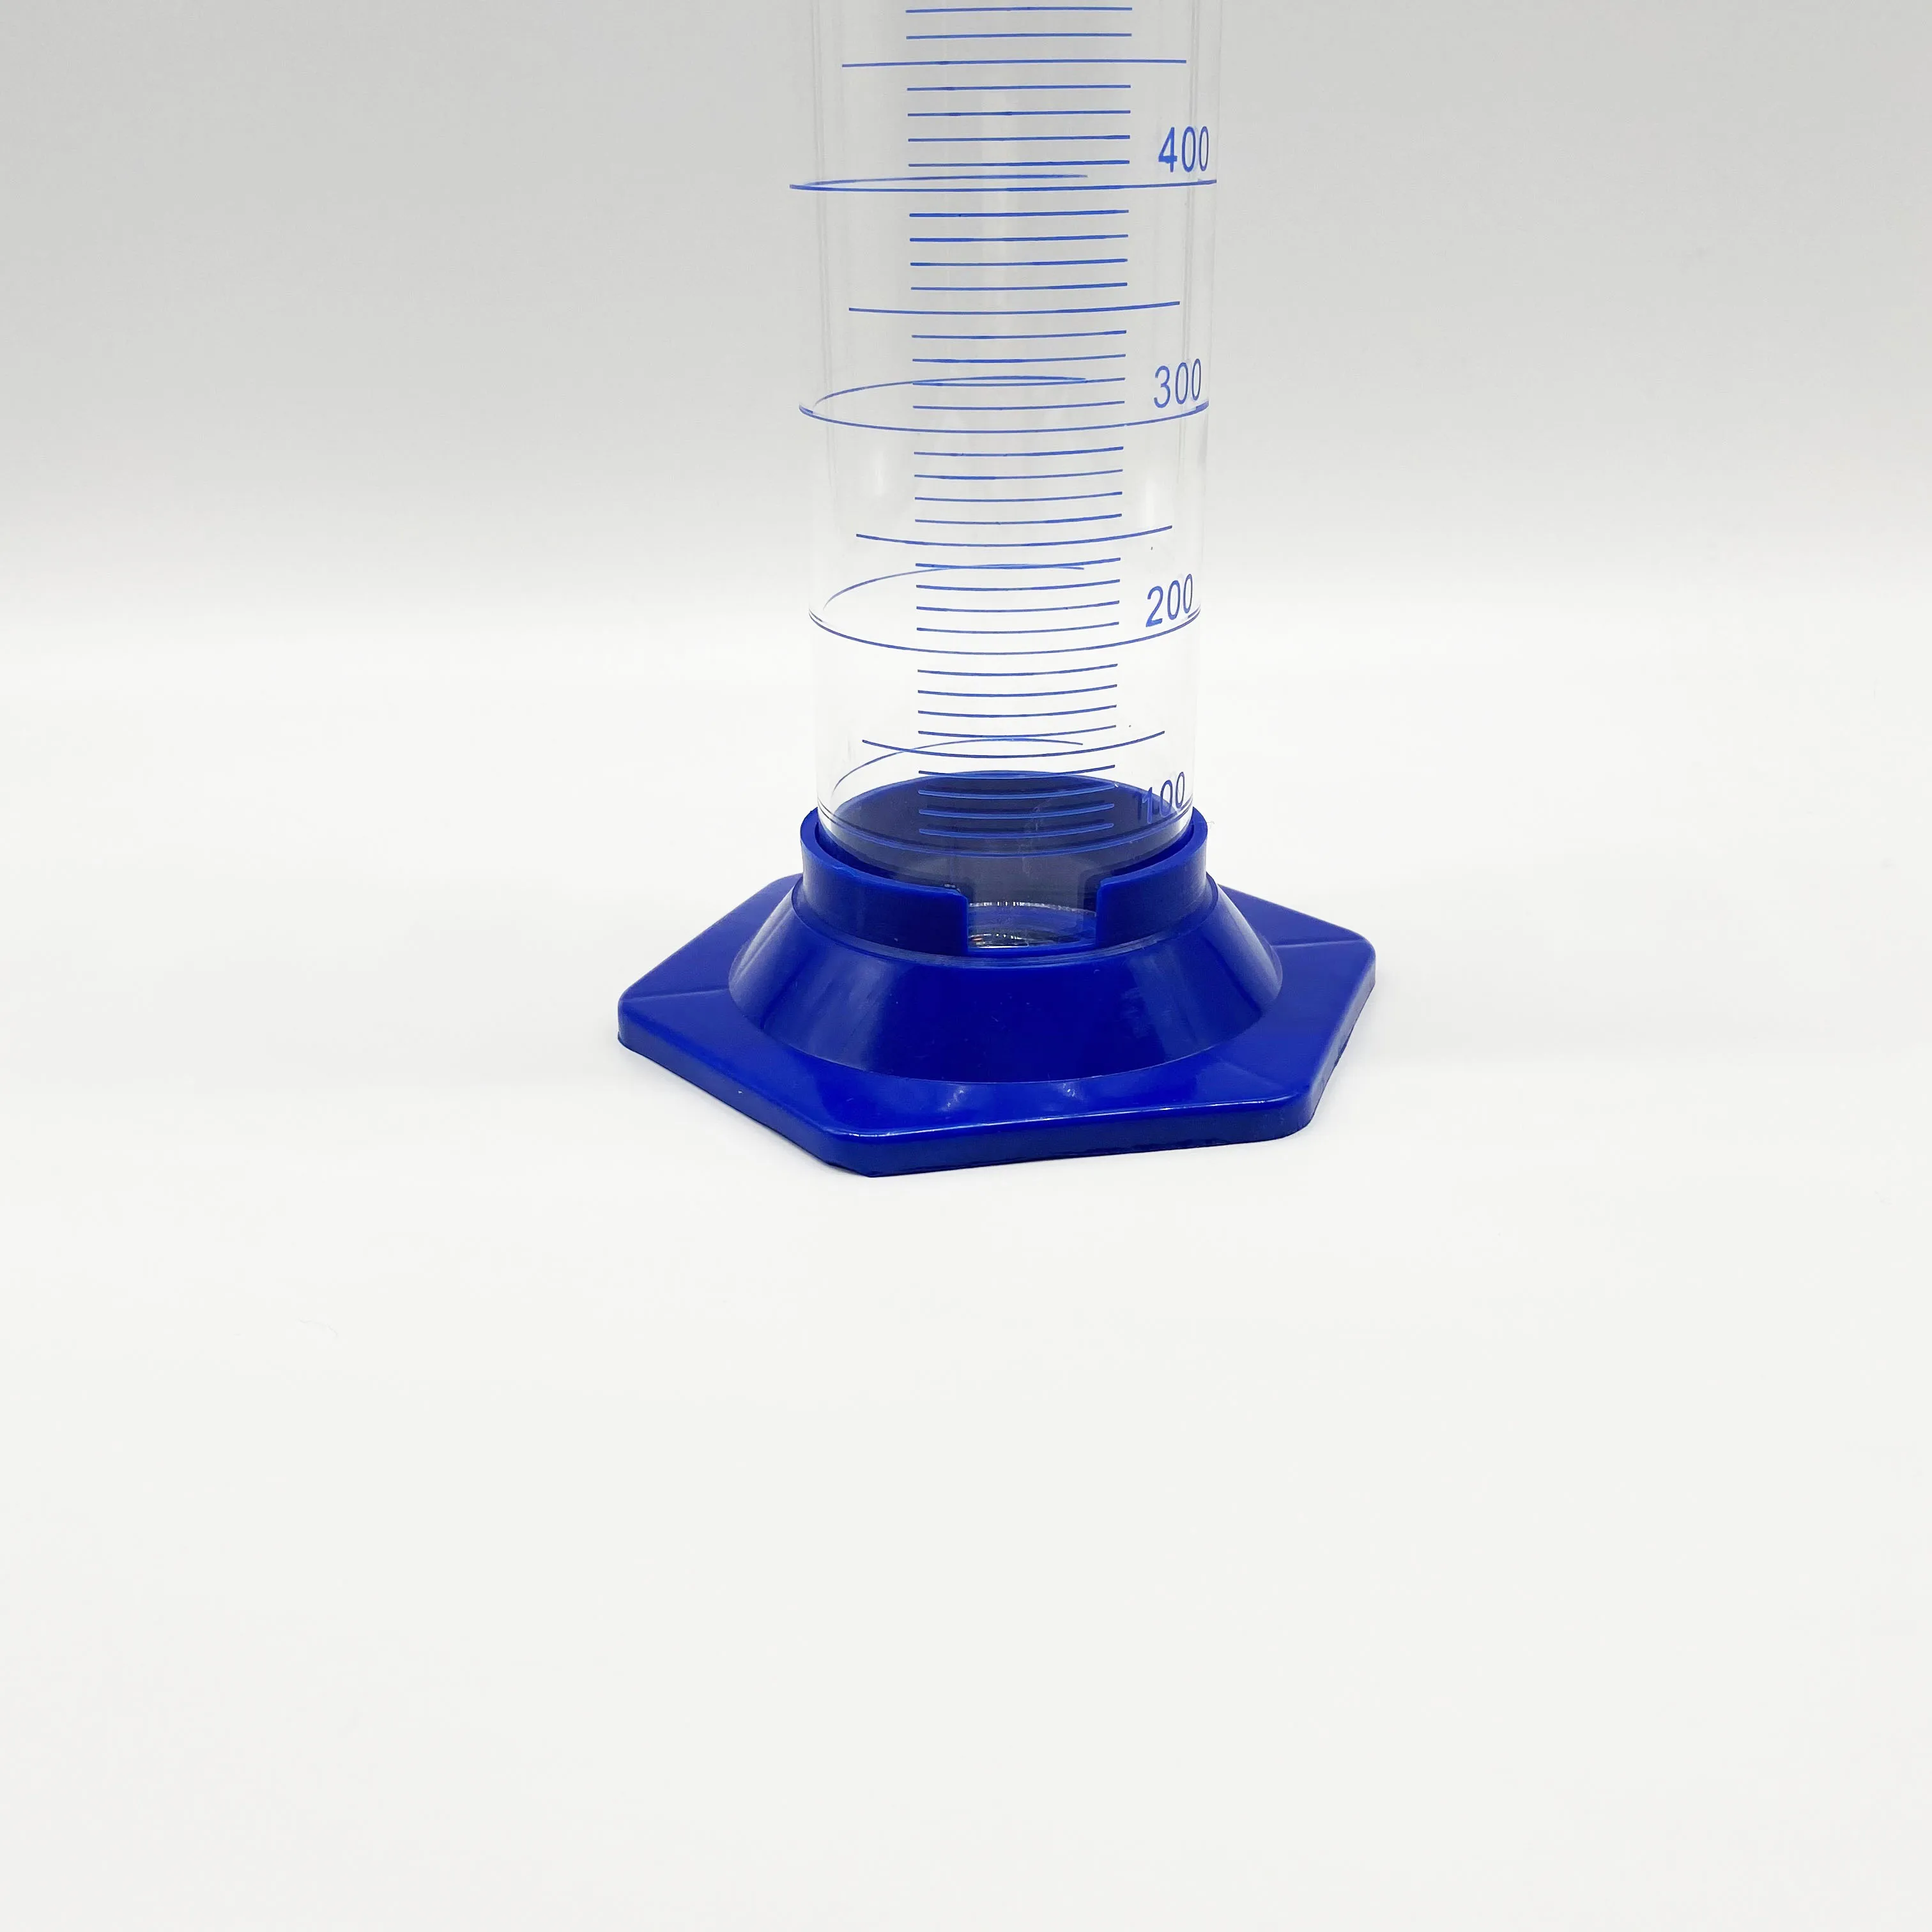 
Best Selling with Brown Blue Graduation 250ml Plastic Base Measuring Cylinder 